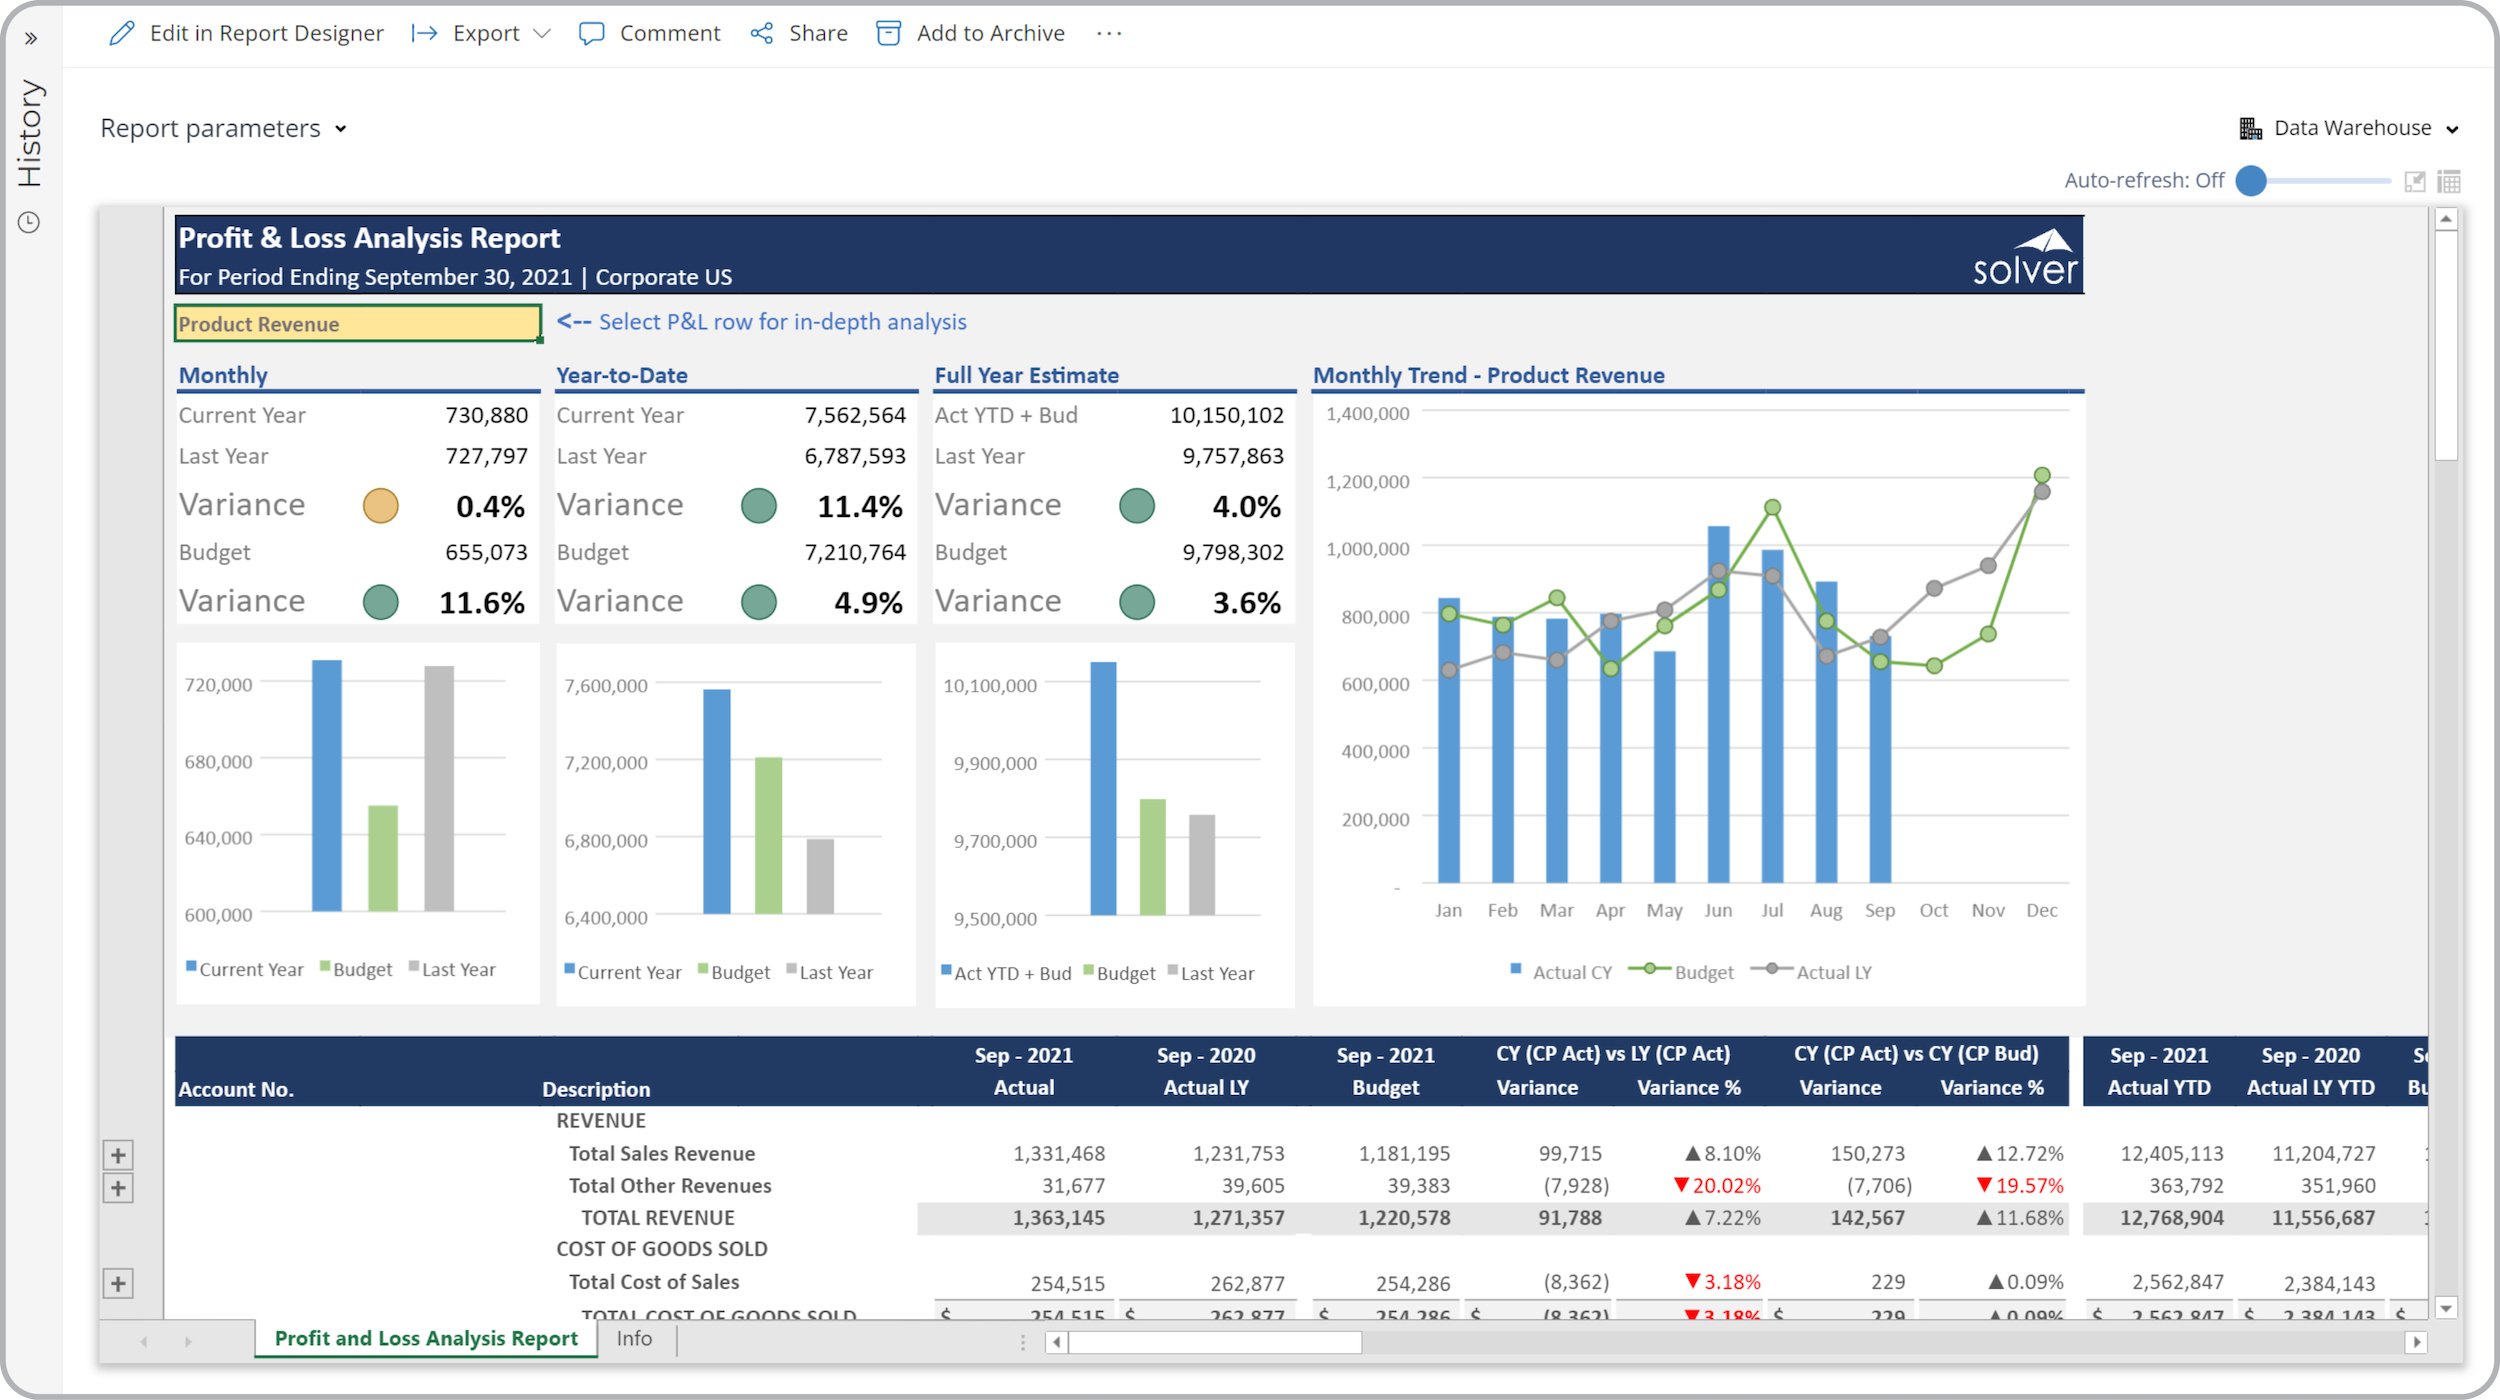 When migrating from Dynamics GP to Business Central, advanced reporting capabilities awaits you with the Solver CPM add-on. 